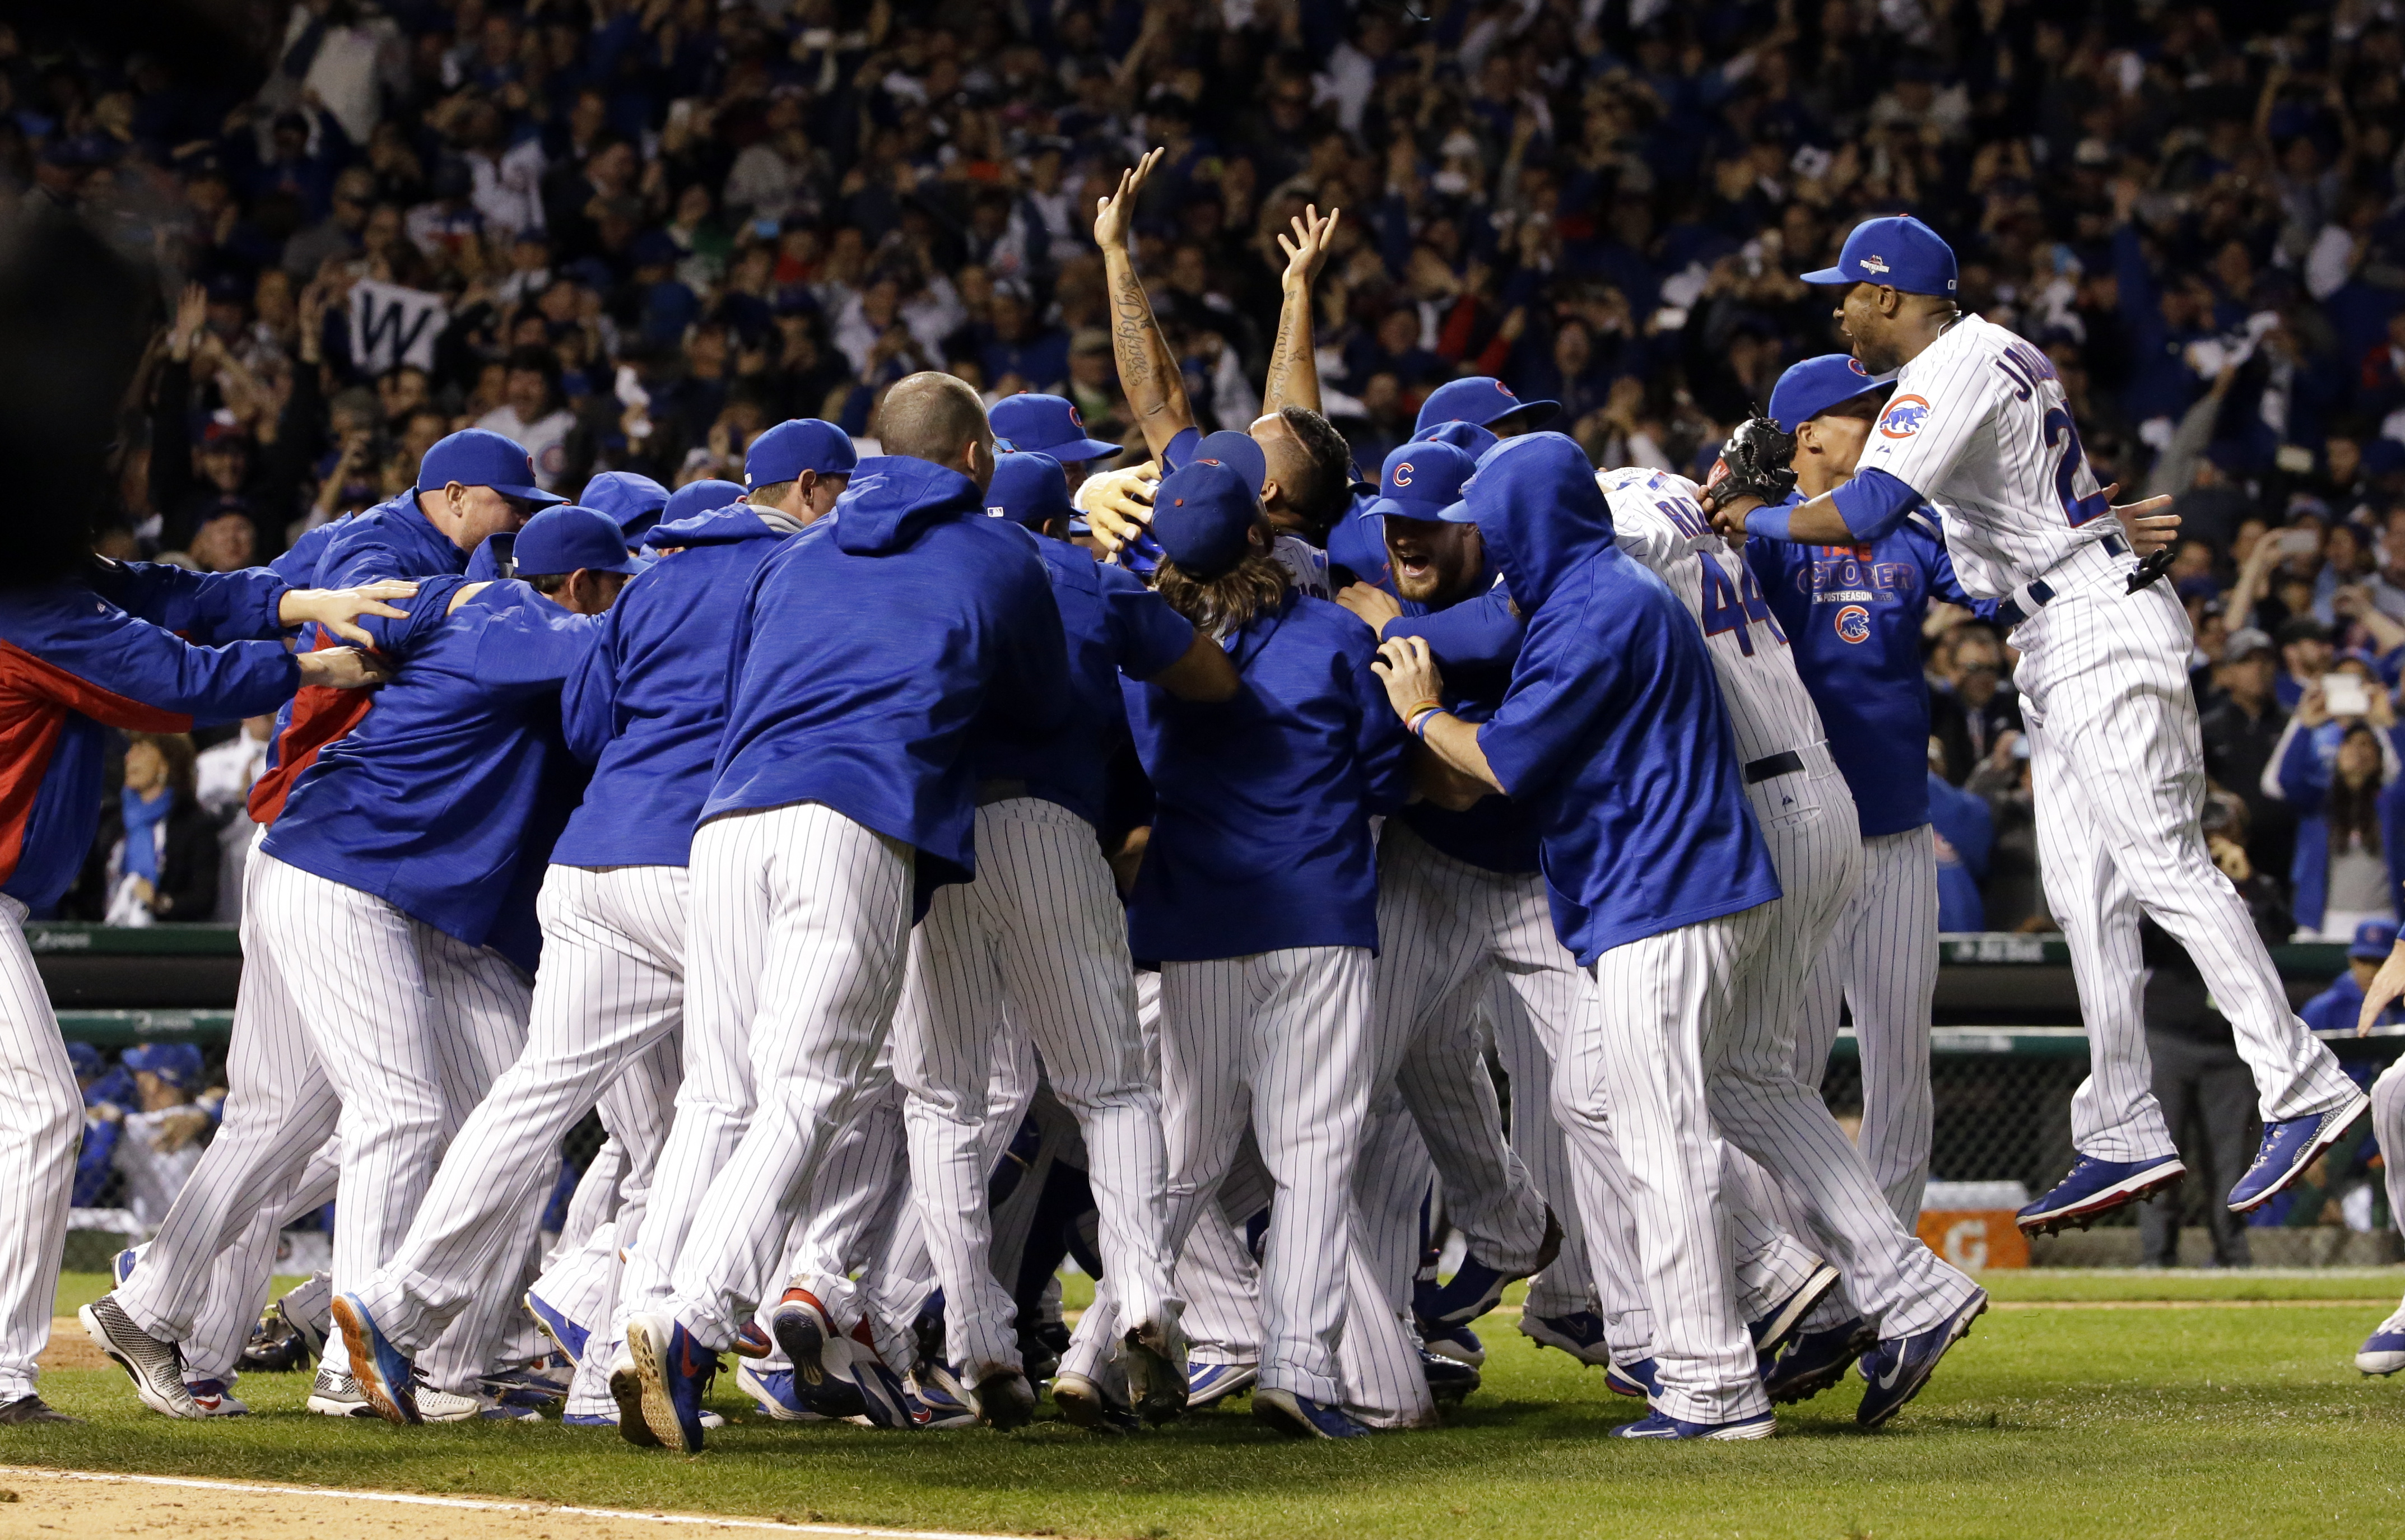 4 Weird Cubs Items to Celebrate Their World Series Win